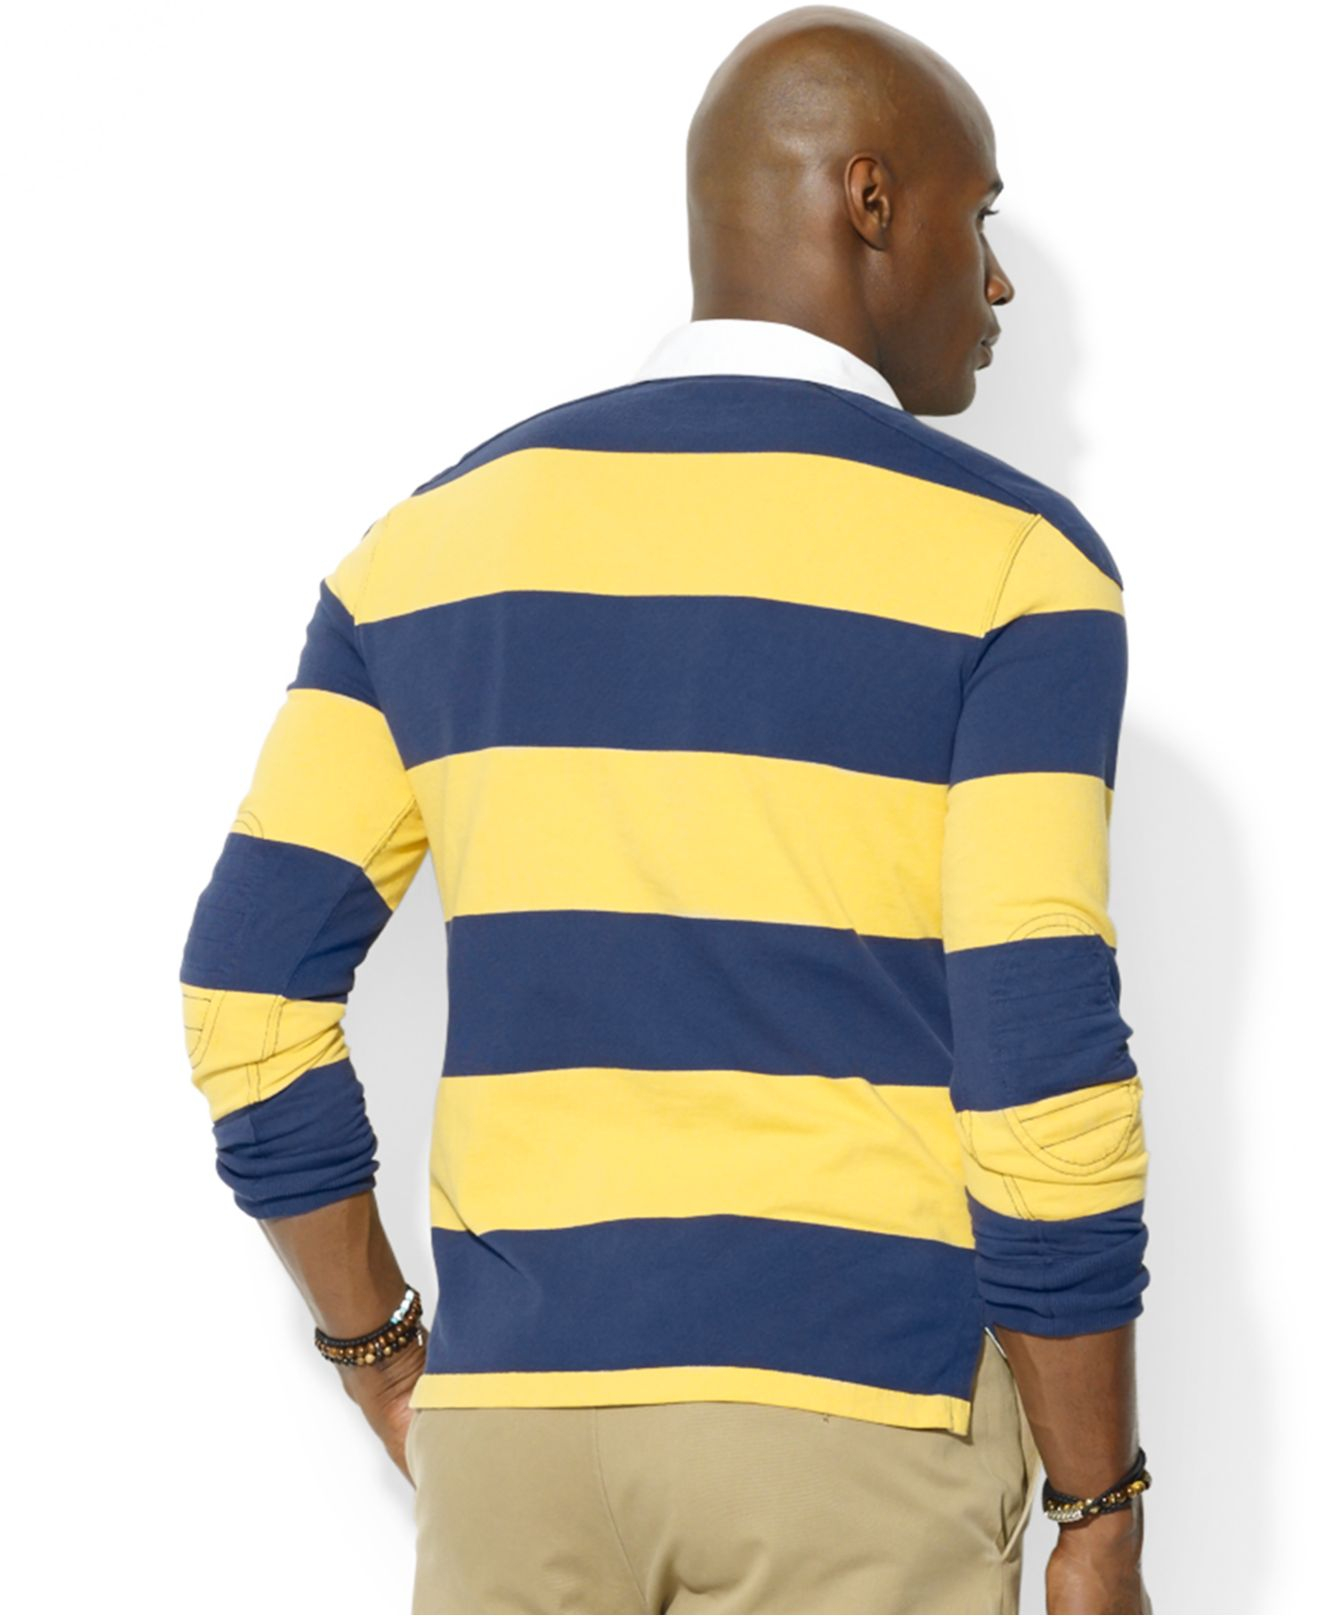 Lyst - Polo Ralph Lauren Big And Tall Long-Sleeve Stripe Rugby Shirt in